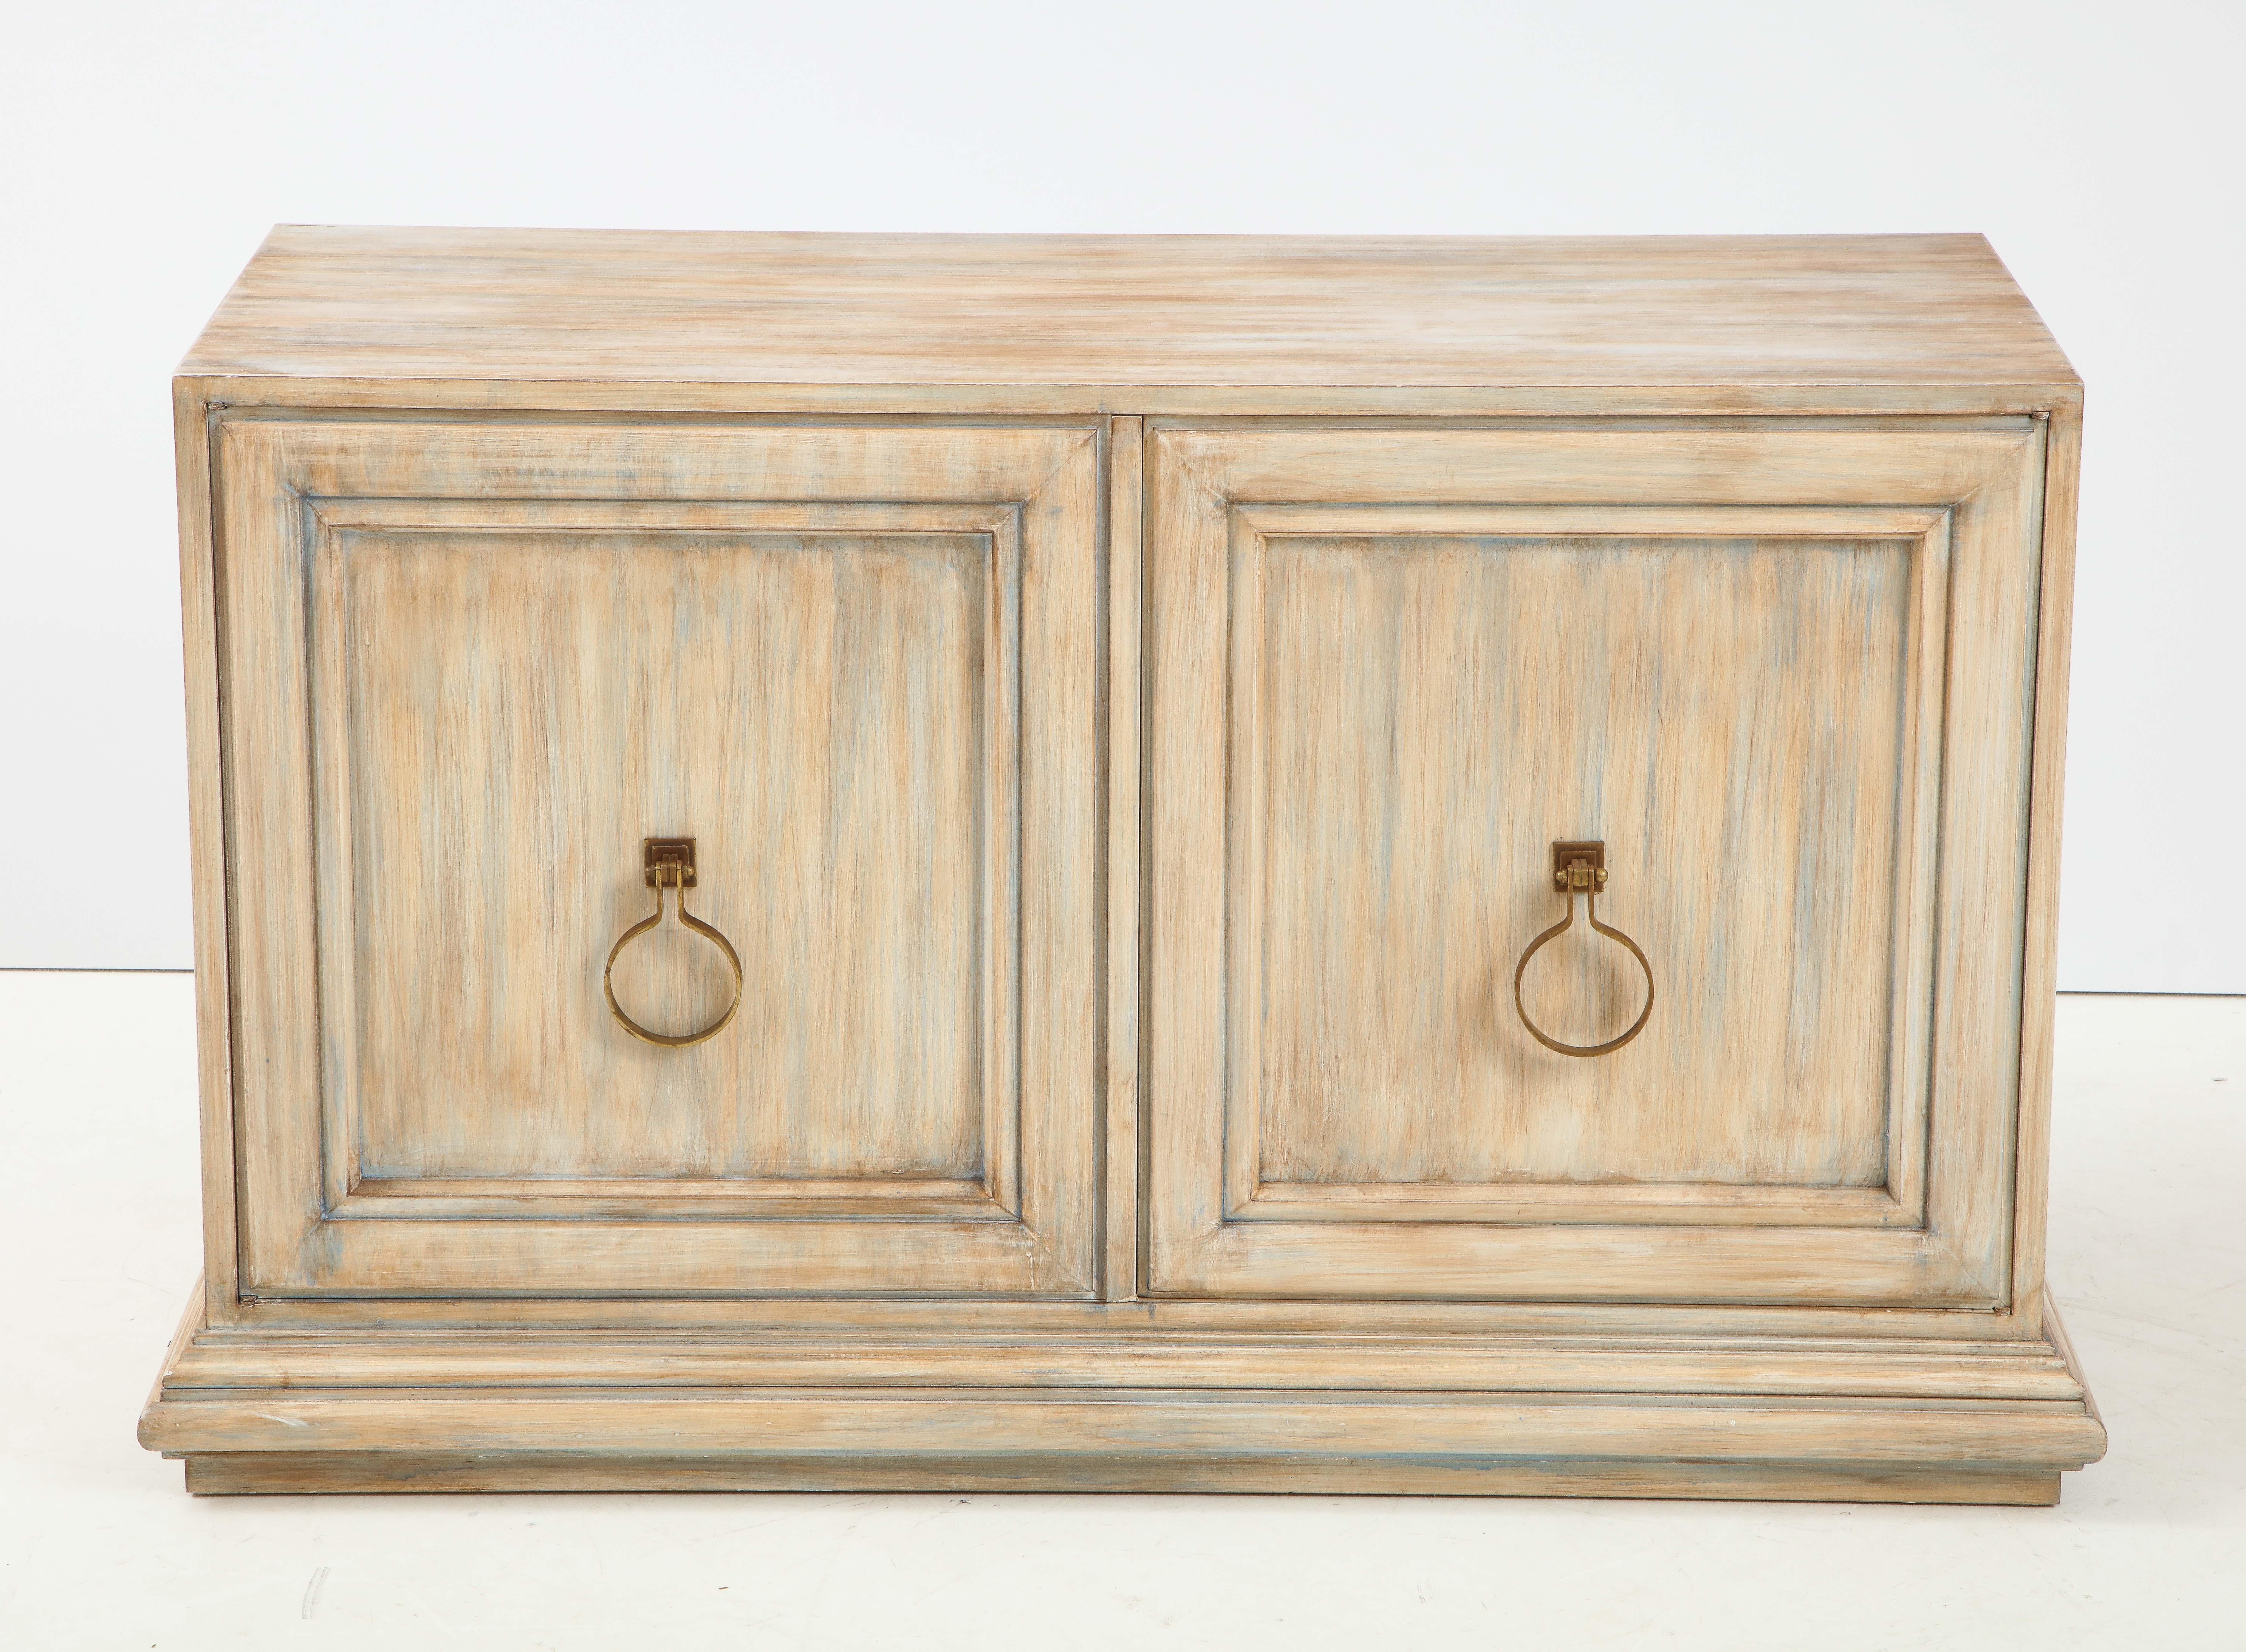 Mid-Century Modern cabinet featuring the original driftwood finish and brass door knocker hardware. Cabinet provides ample storage with 1 adjustable shelf.